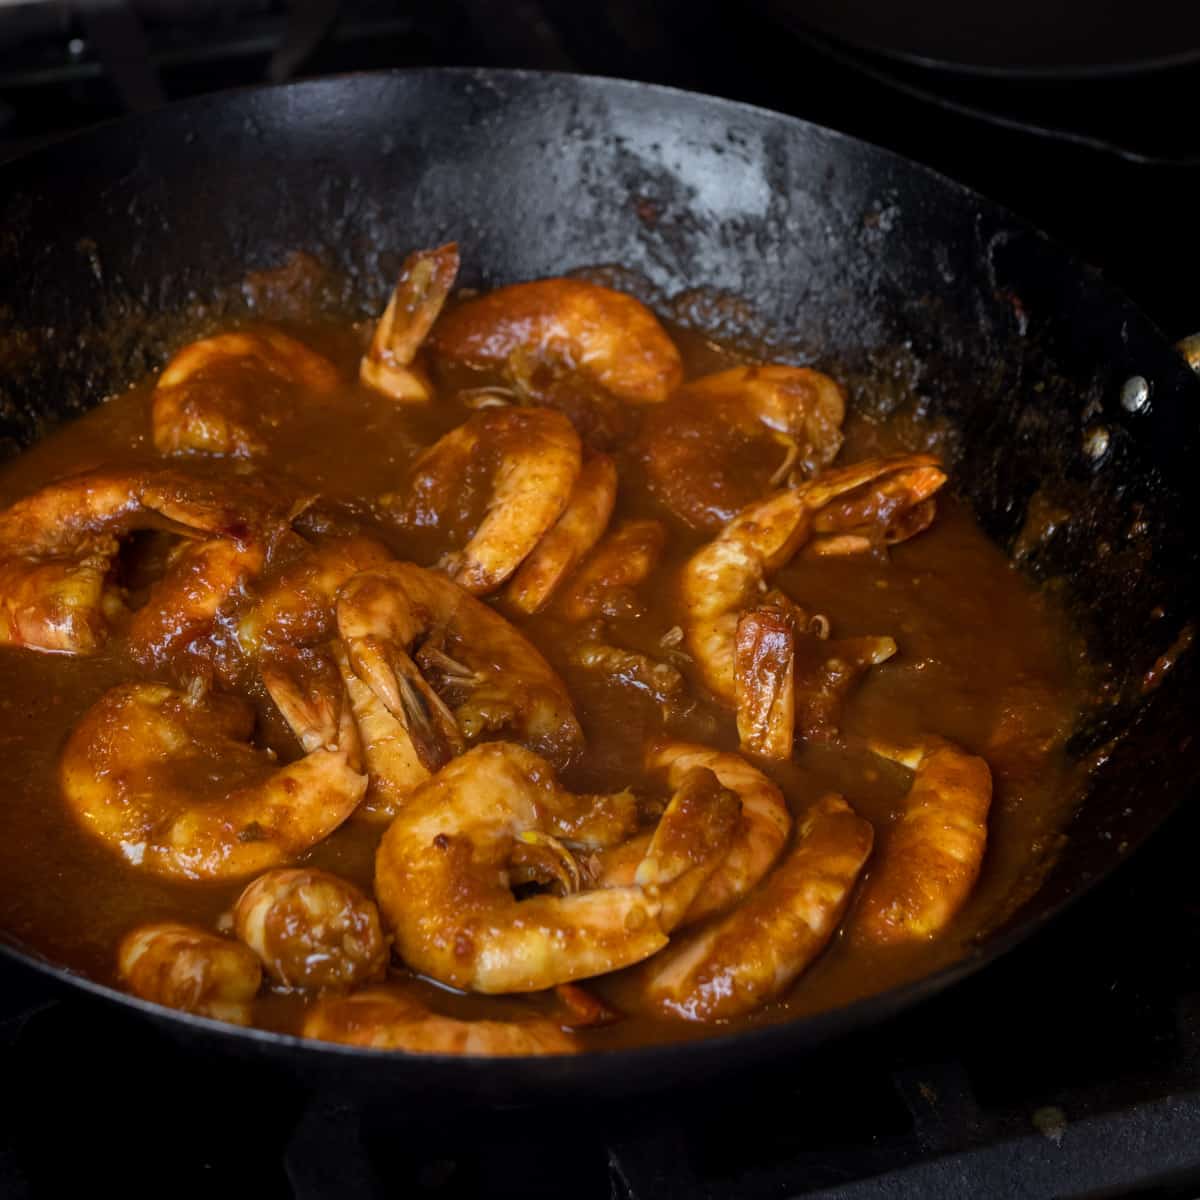 Cooked shrimp coated in sauce.